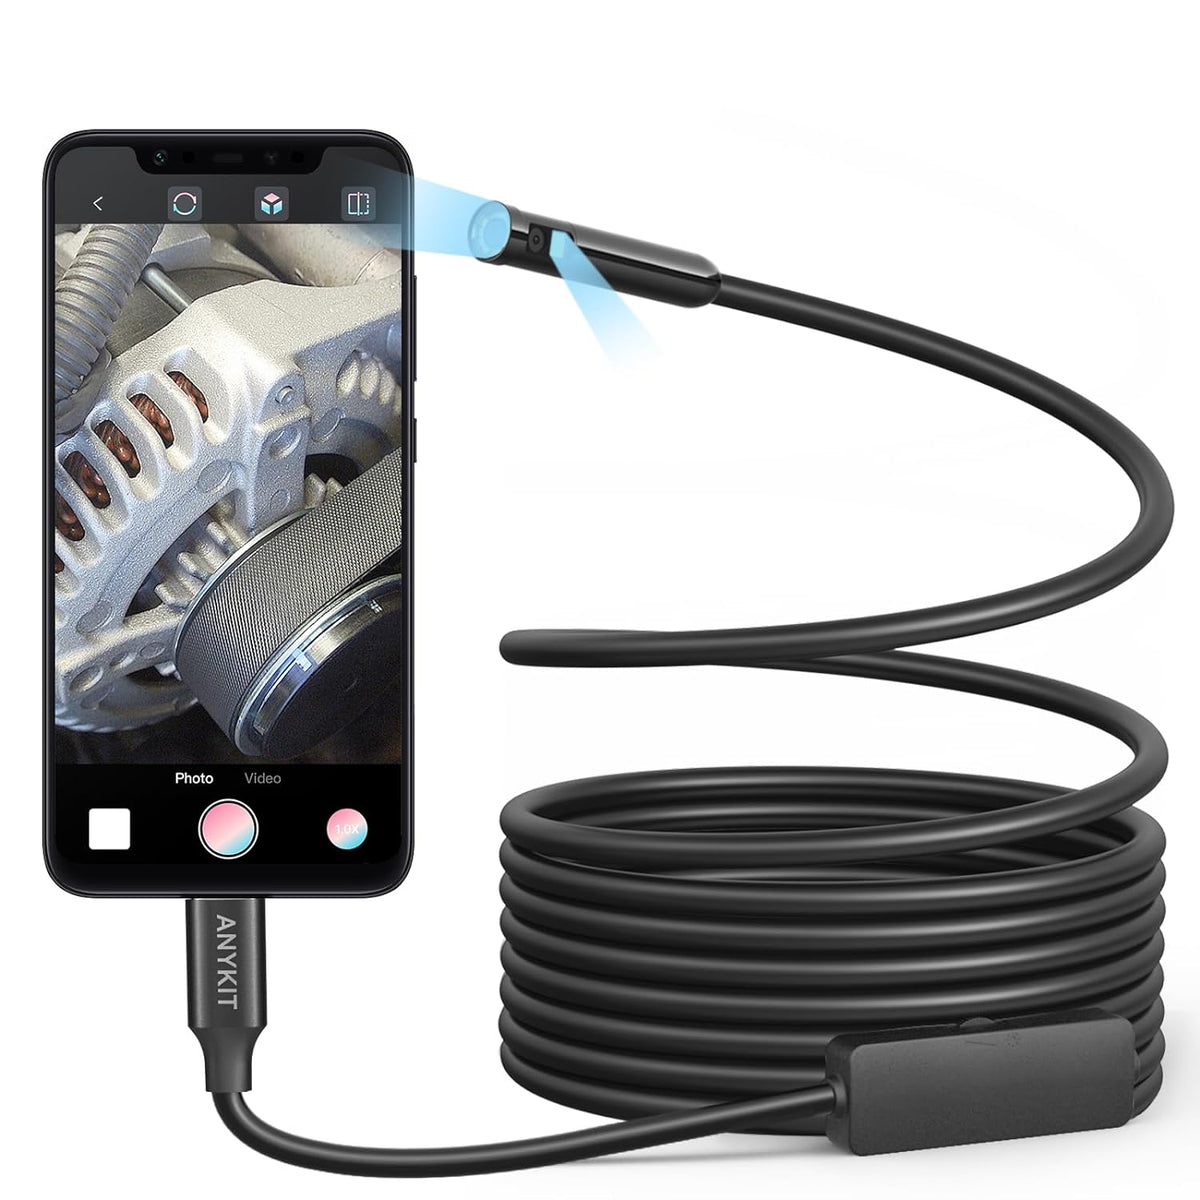 Dual Lens Endoscope Camera with Light, Anykit 2 in 1 USB Borescope with 8 Adjustable LED Lights, IP67 Waterproof 8.0mm Inspection Camera for iPhone, iPad, OTG Android Phones,10ft Semi-Rigid Cable